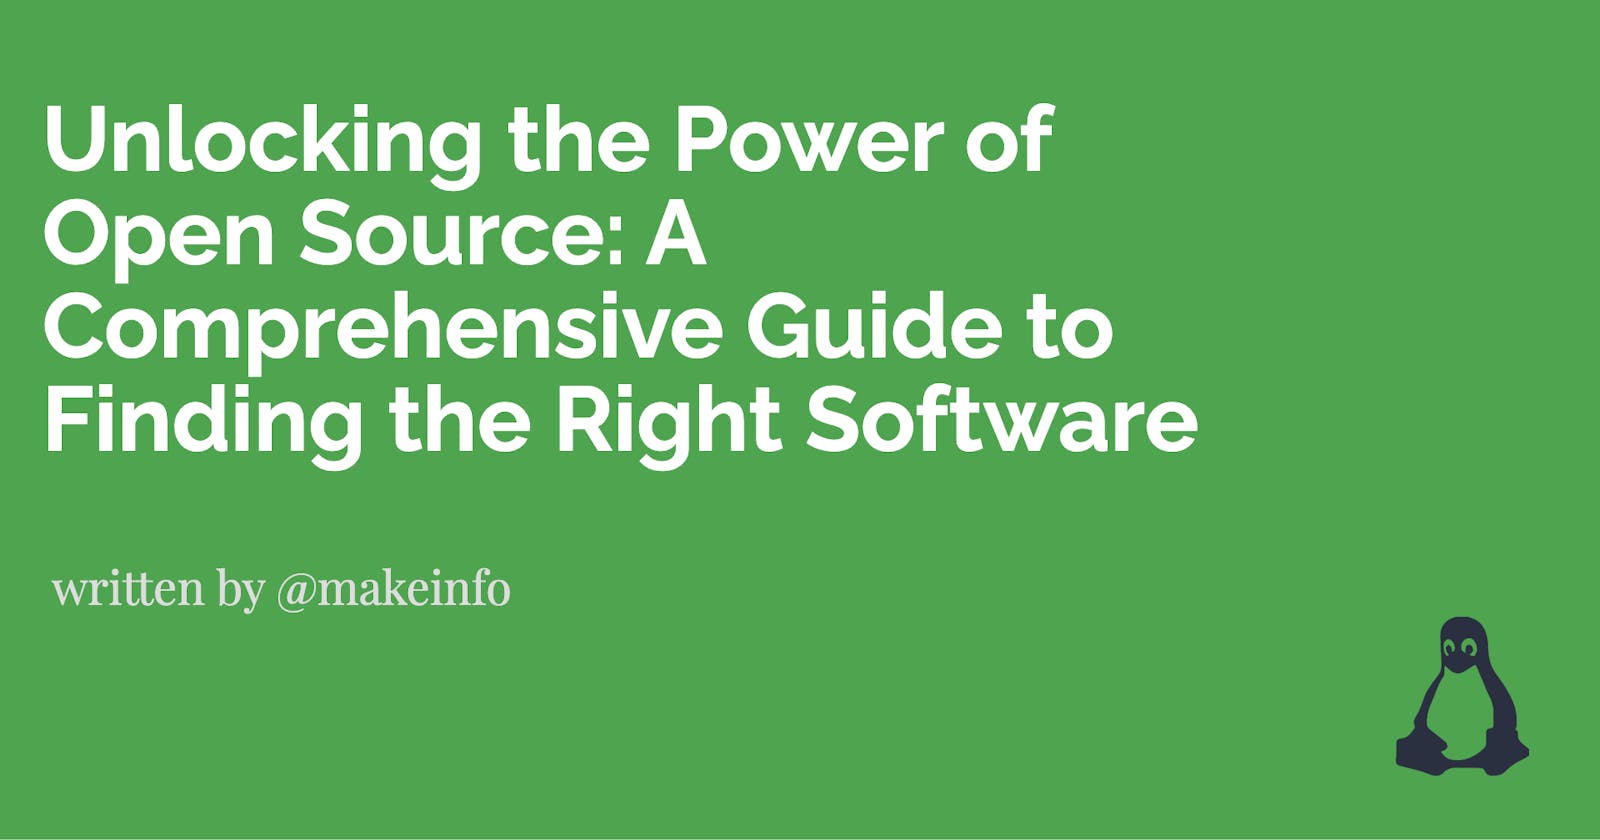 Unlocking the Power of Open Source: A Comprehensive Guide to Finding the Right Software